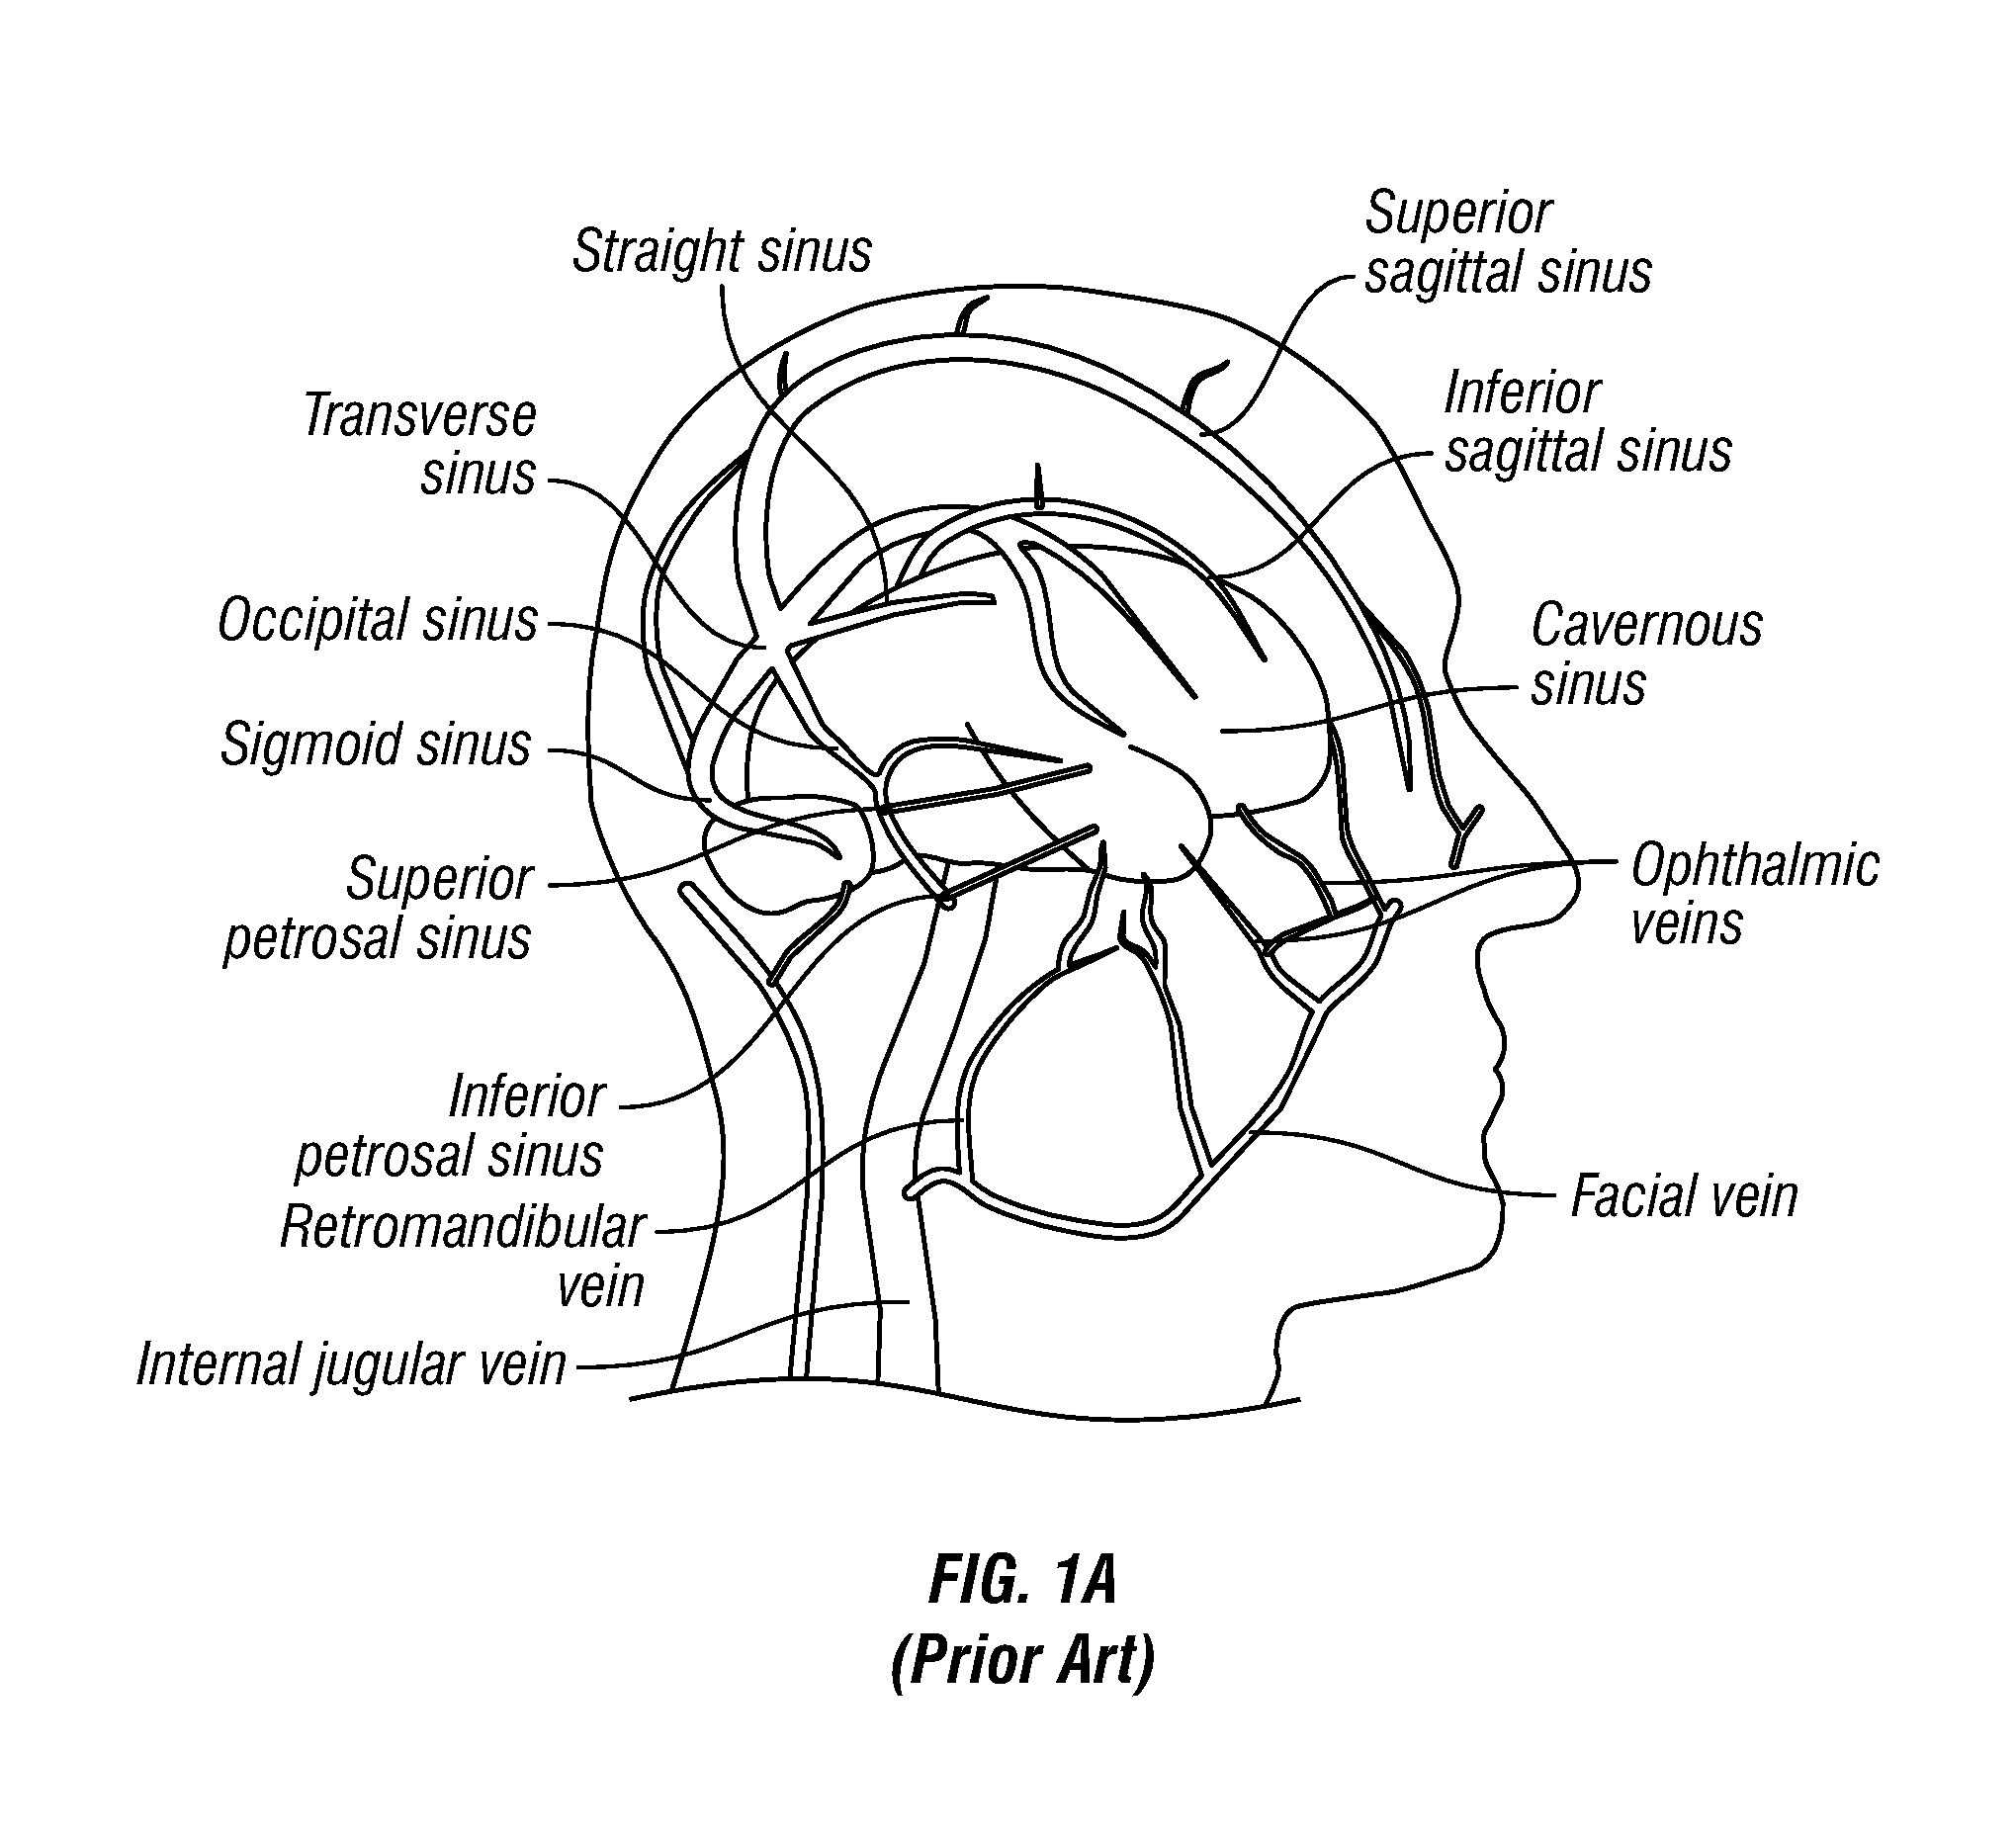 Methods, Systems and Devices for Treatment of Cerebrospinal Venous Insufficiency and Multiple Sclerosis